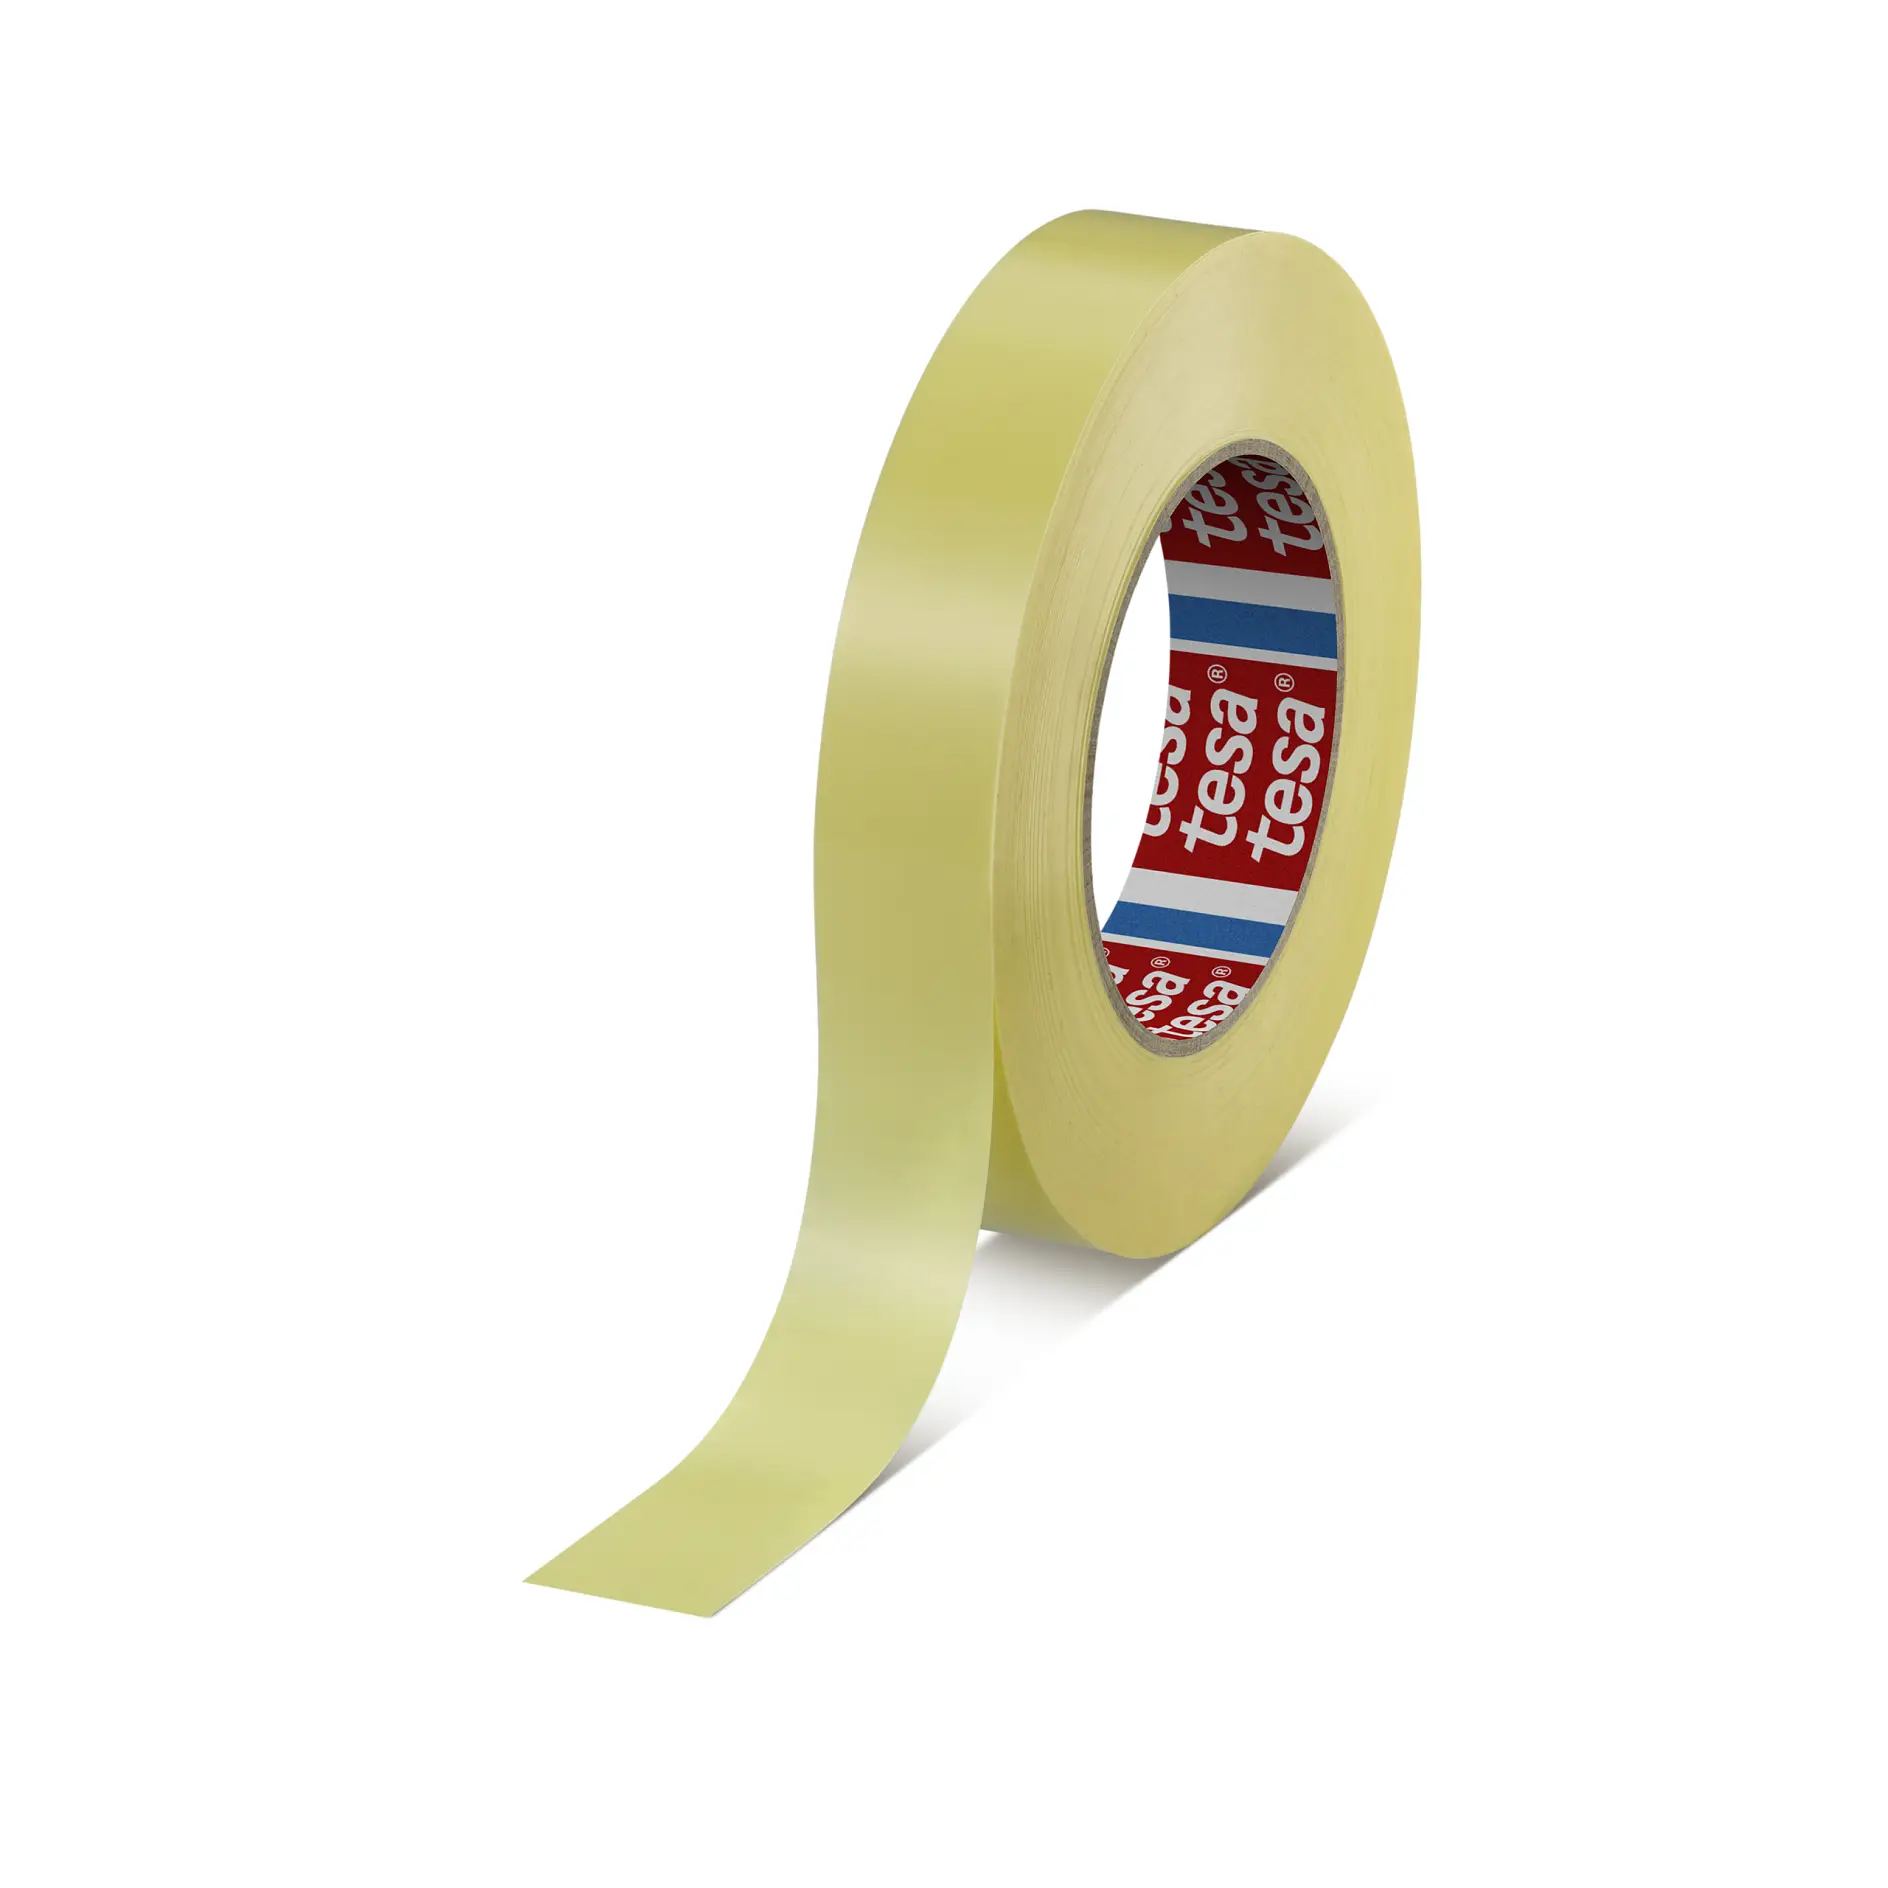 tesa-4289-heavy-duty-tensilised-strapping-tape-yellow-042890011000-pr